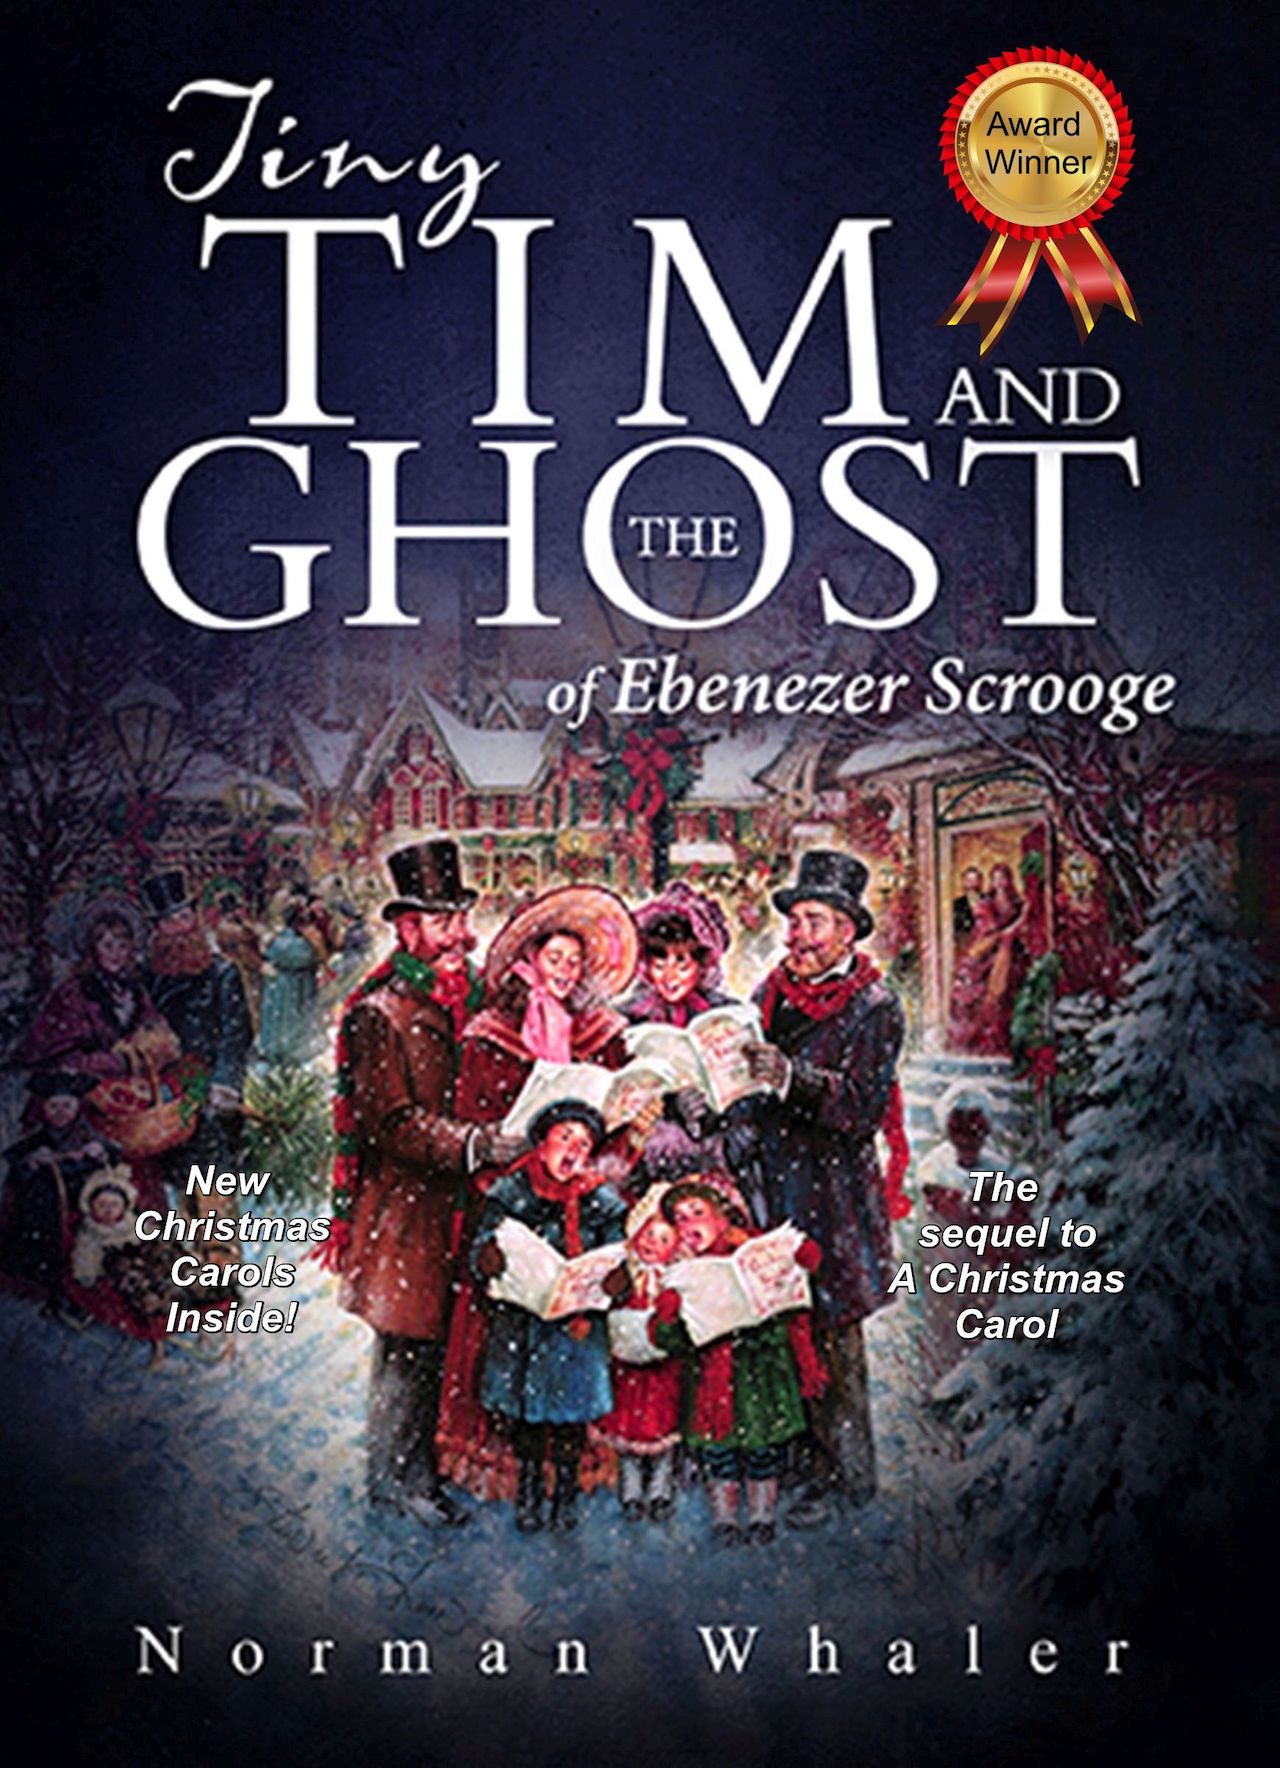 Ebenezer Scrooge dies suddenly just days before Christmas. Tiny Tim, now a young man who lost his sweetheart love, Becky, battles anger and lost faith with the new loss of his best friend. Scrooge’s ghost returns to to teach Tim a much needed lesson about faith...and the real meaning of Christmas!